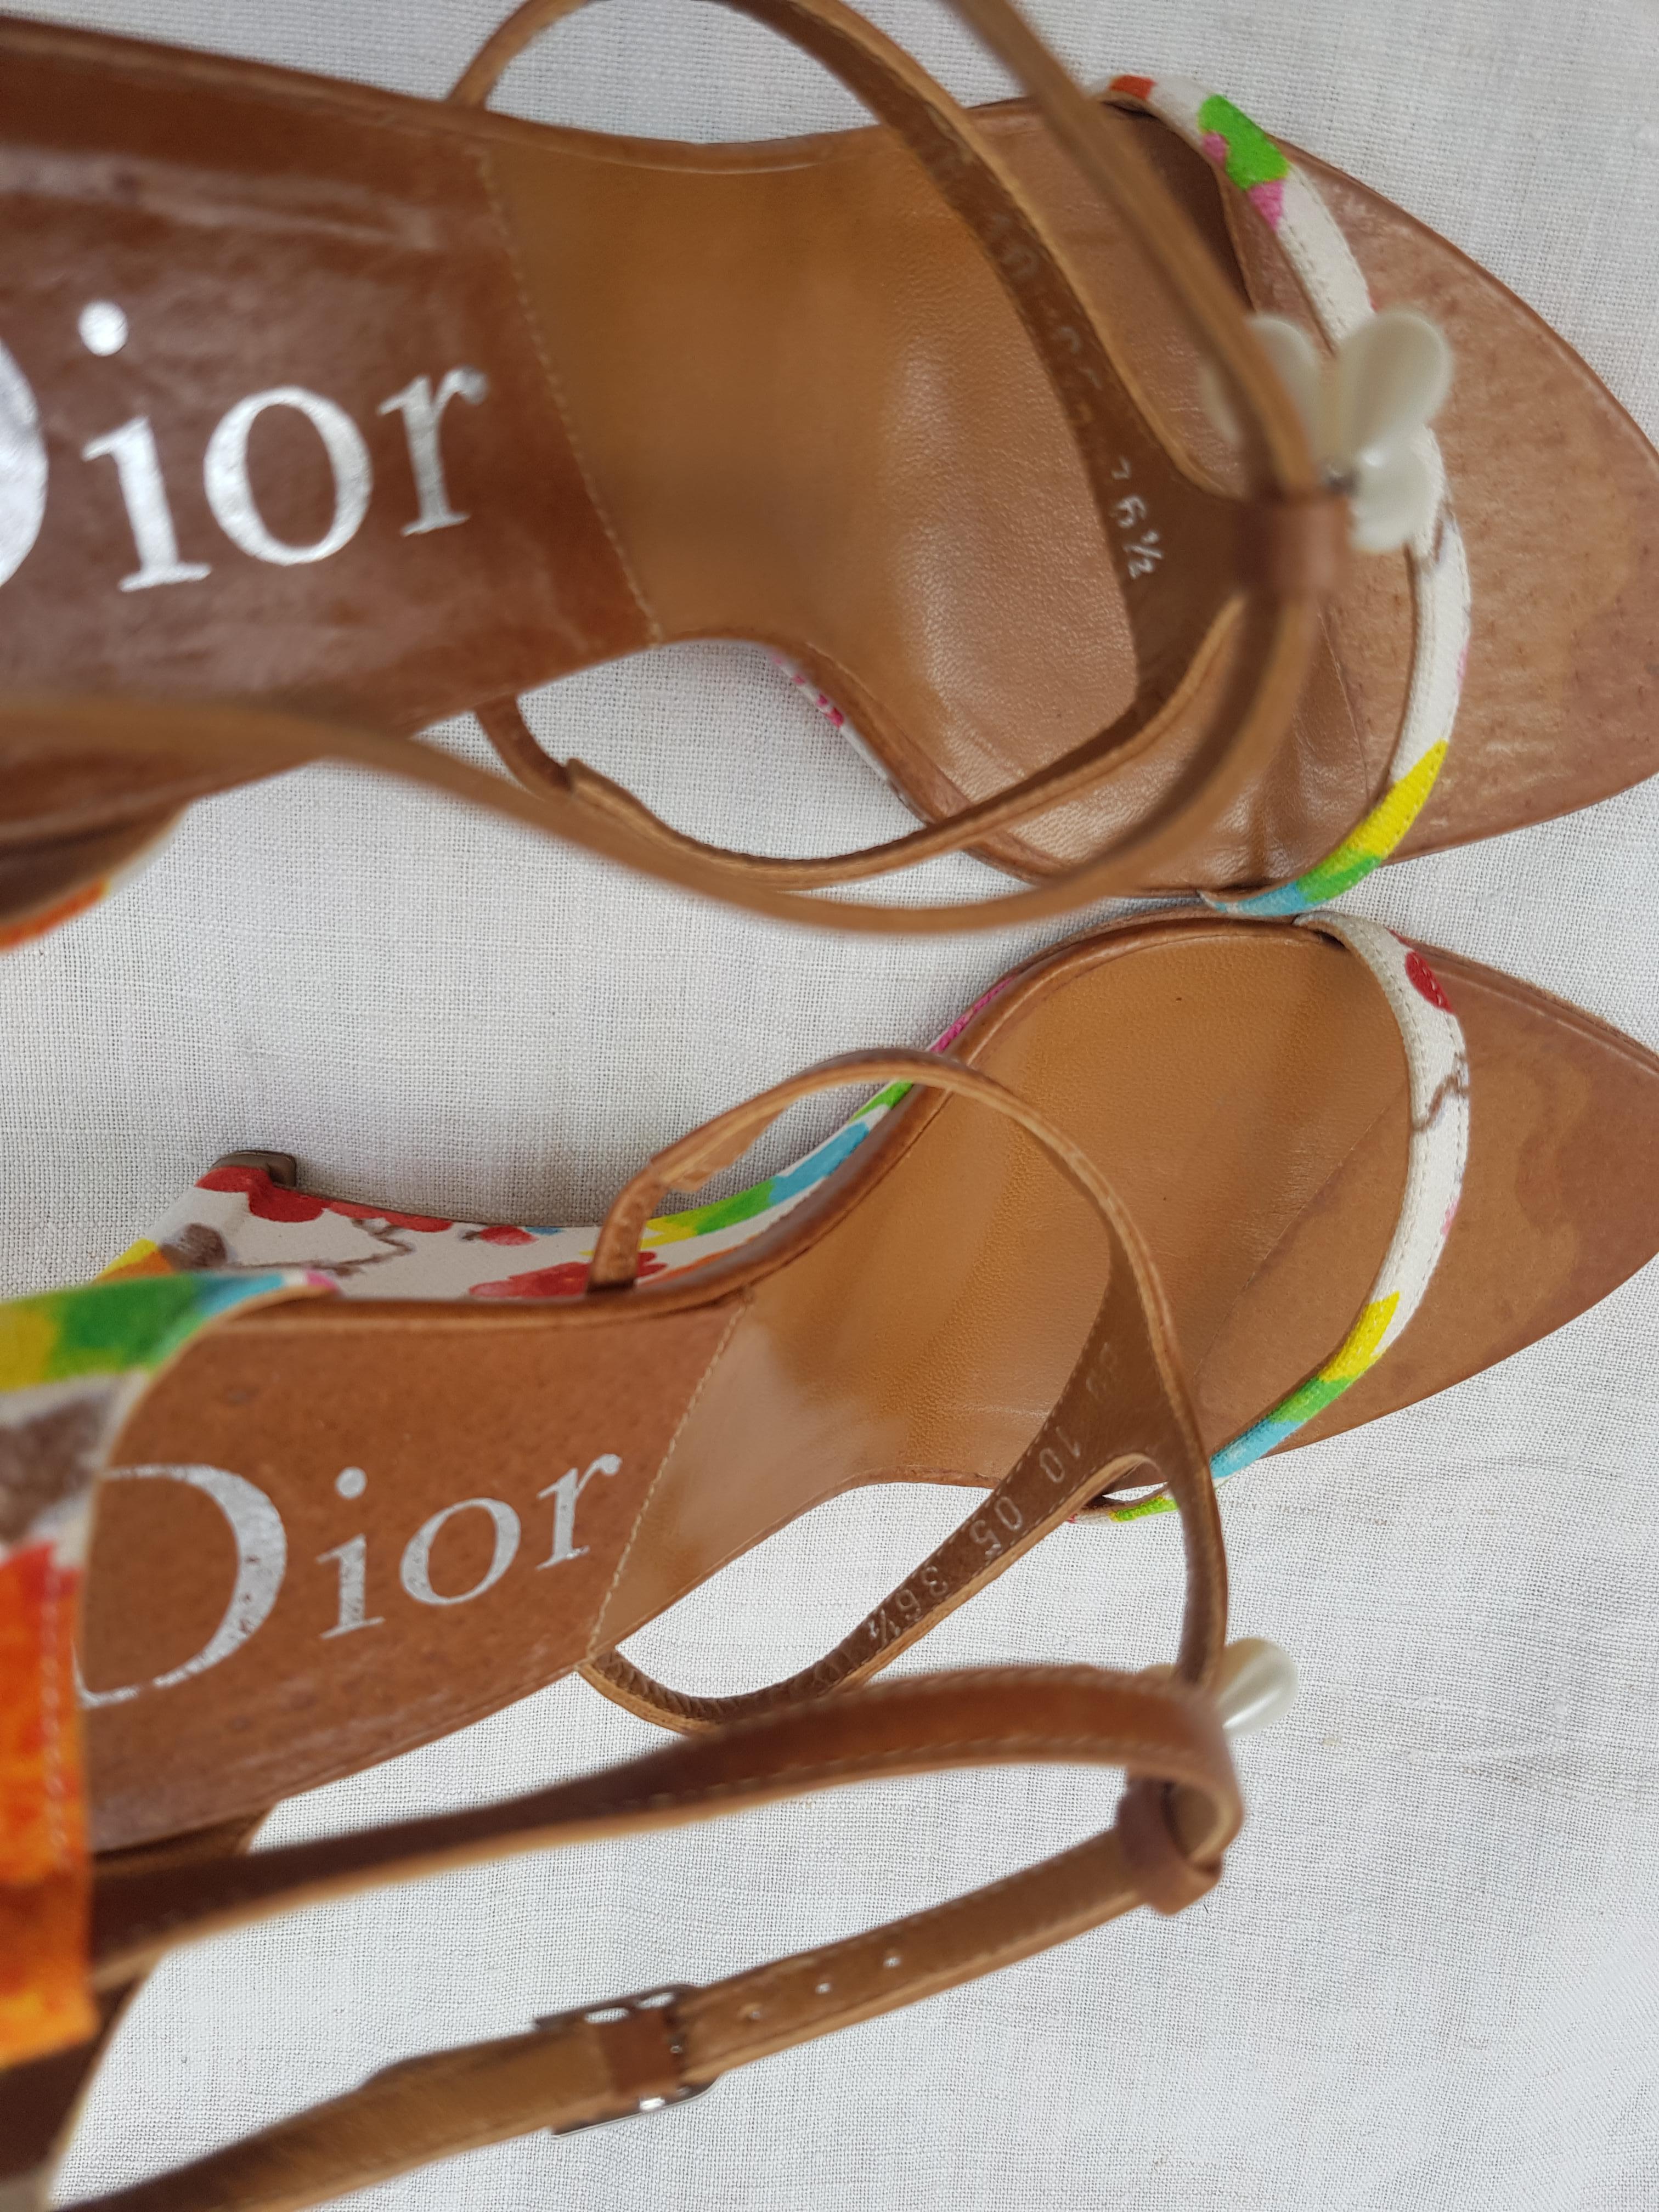 Brown DIOR SS 2005 wedges Sandals with floral print by John Galliano For Sale